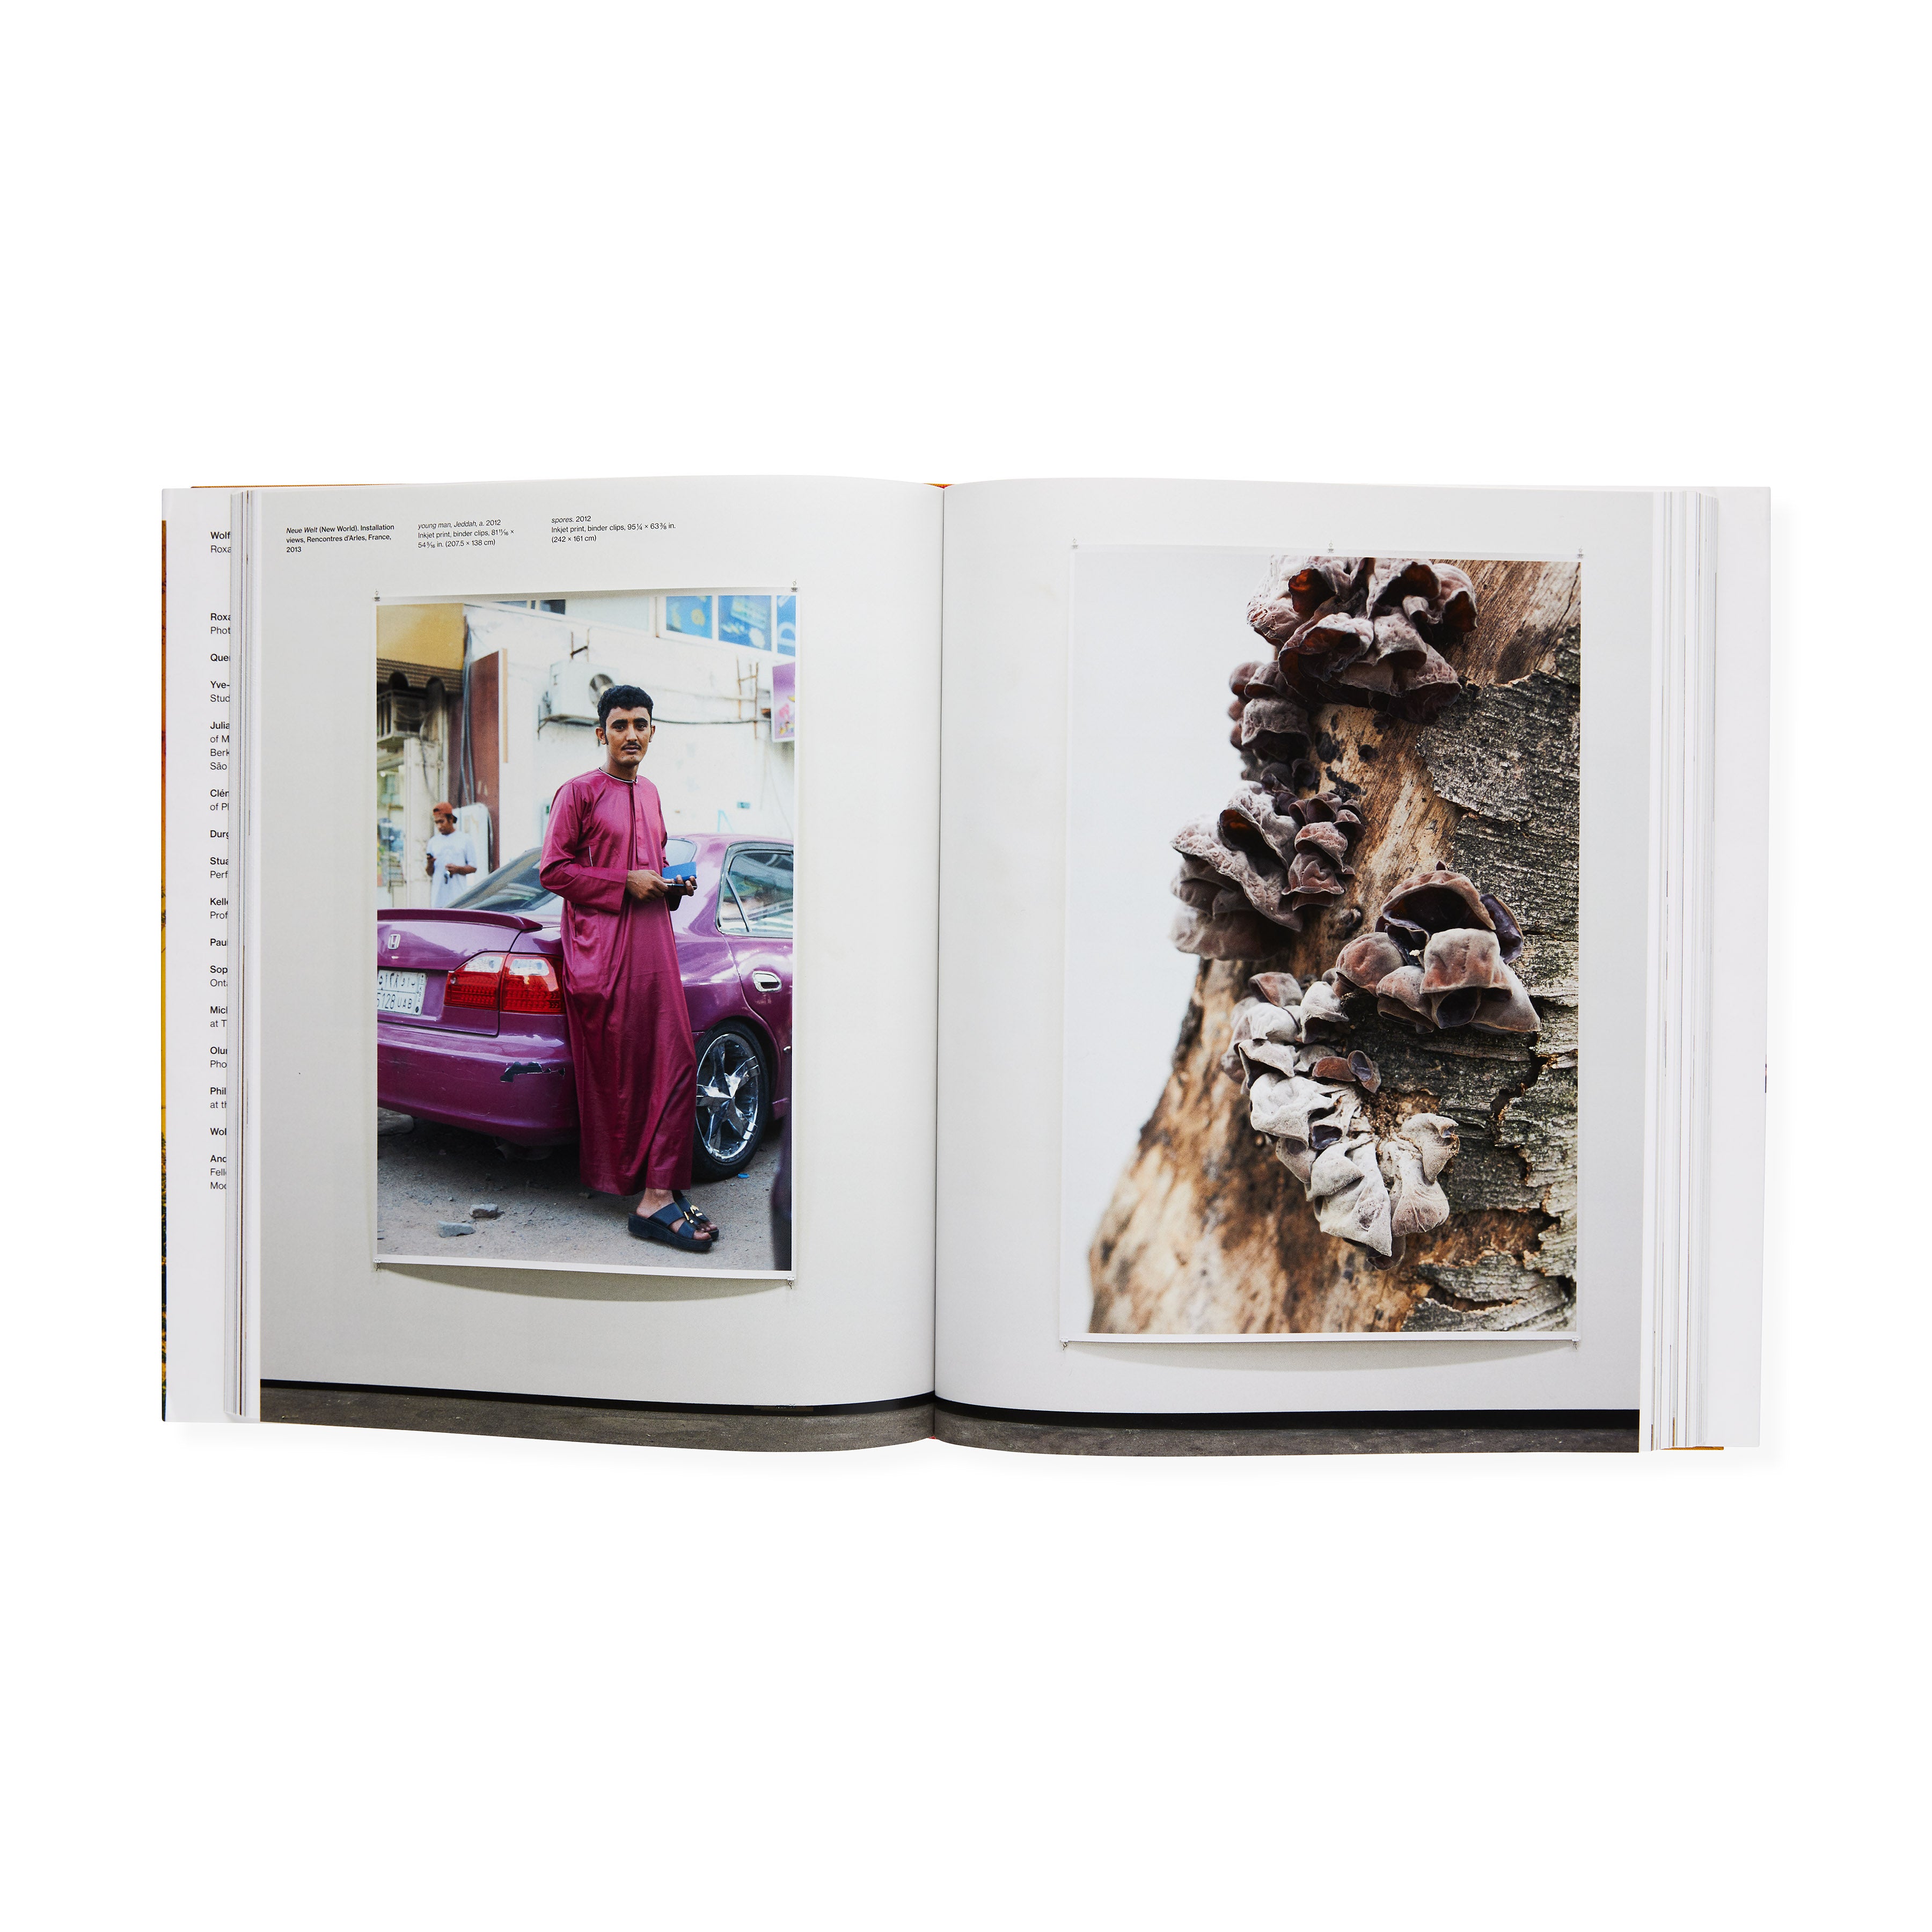 Wolfgang Tillmans: To look without fear - Hardcover – MoMA Design 